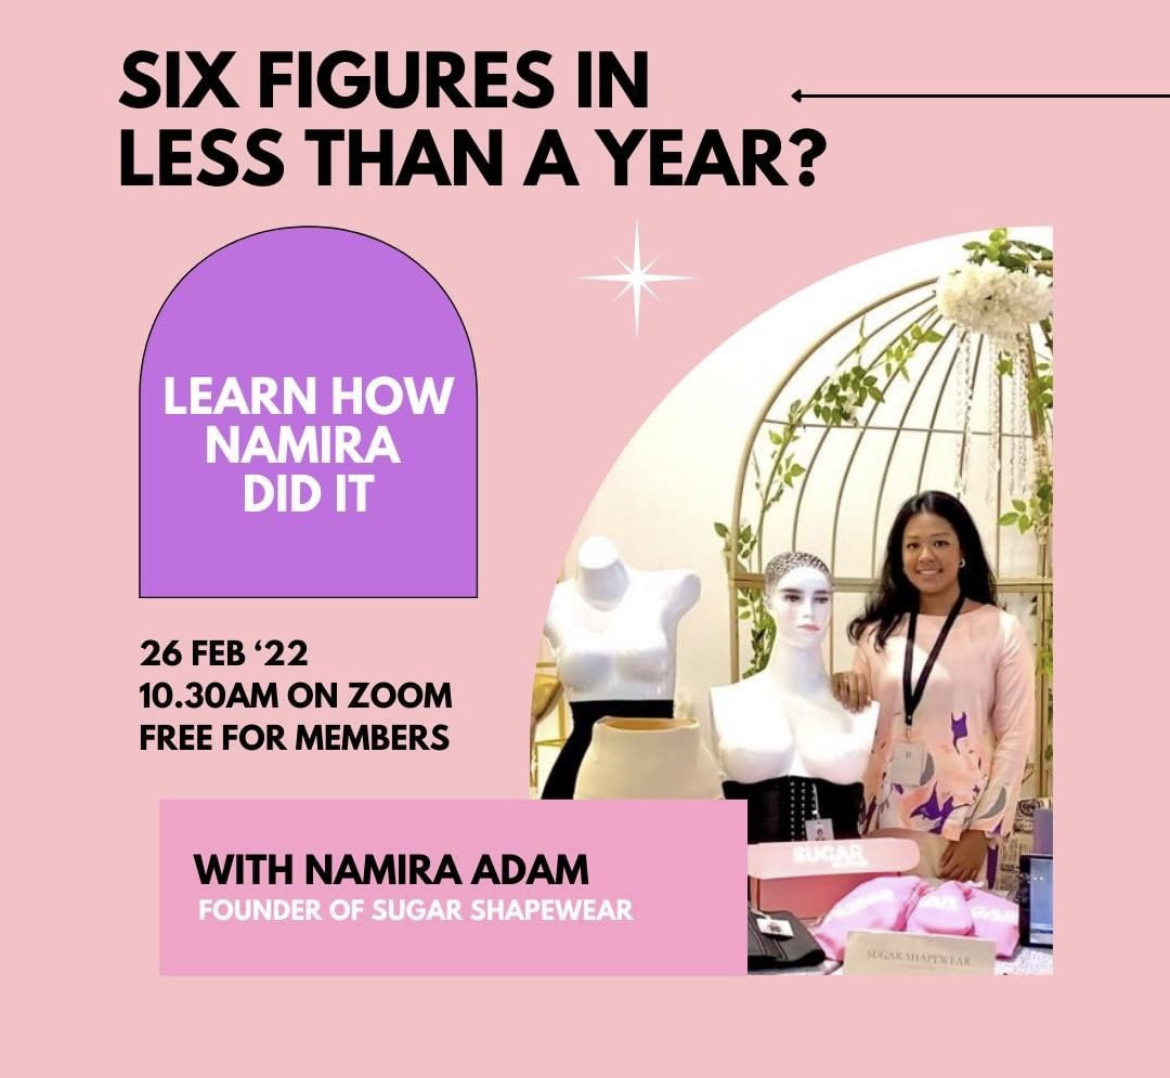 How to Build a 6 Figure Business in a Year